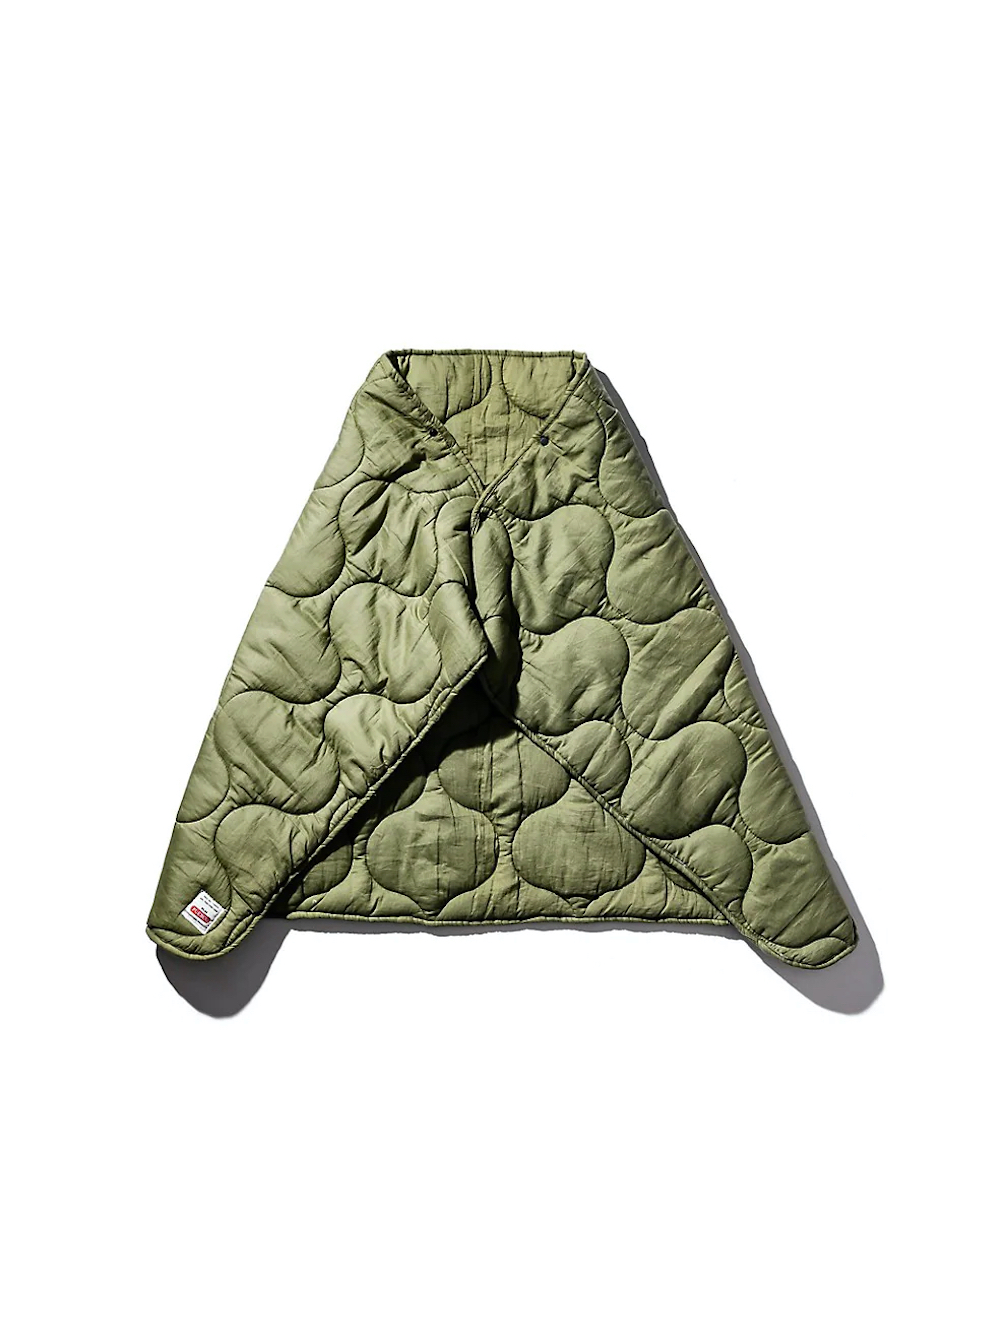 Either worn as a cape or used as a throw, the quilted wrap blanket from Puebco is a militant take on comfort with button clasps to secure everything in place and uses a poly fill for added warmth